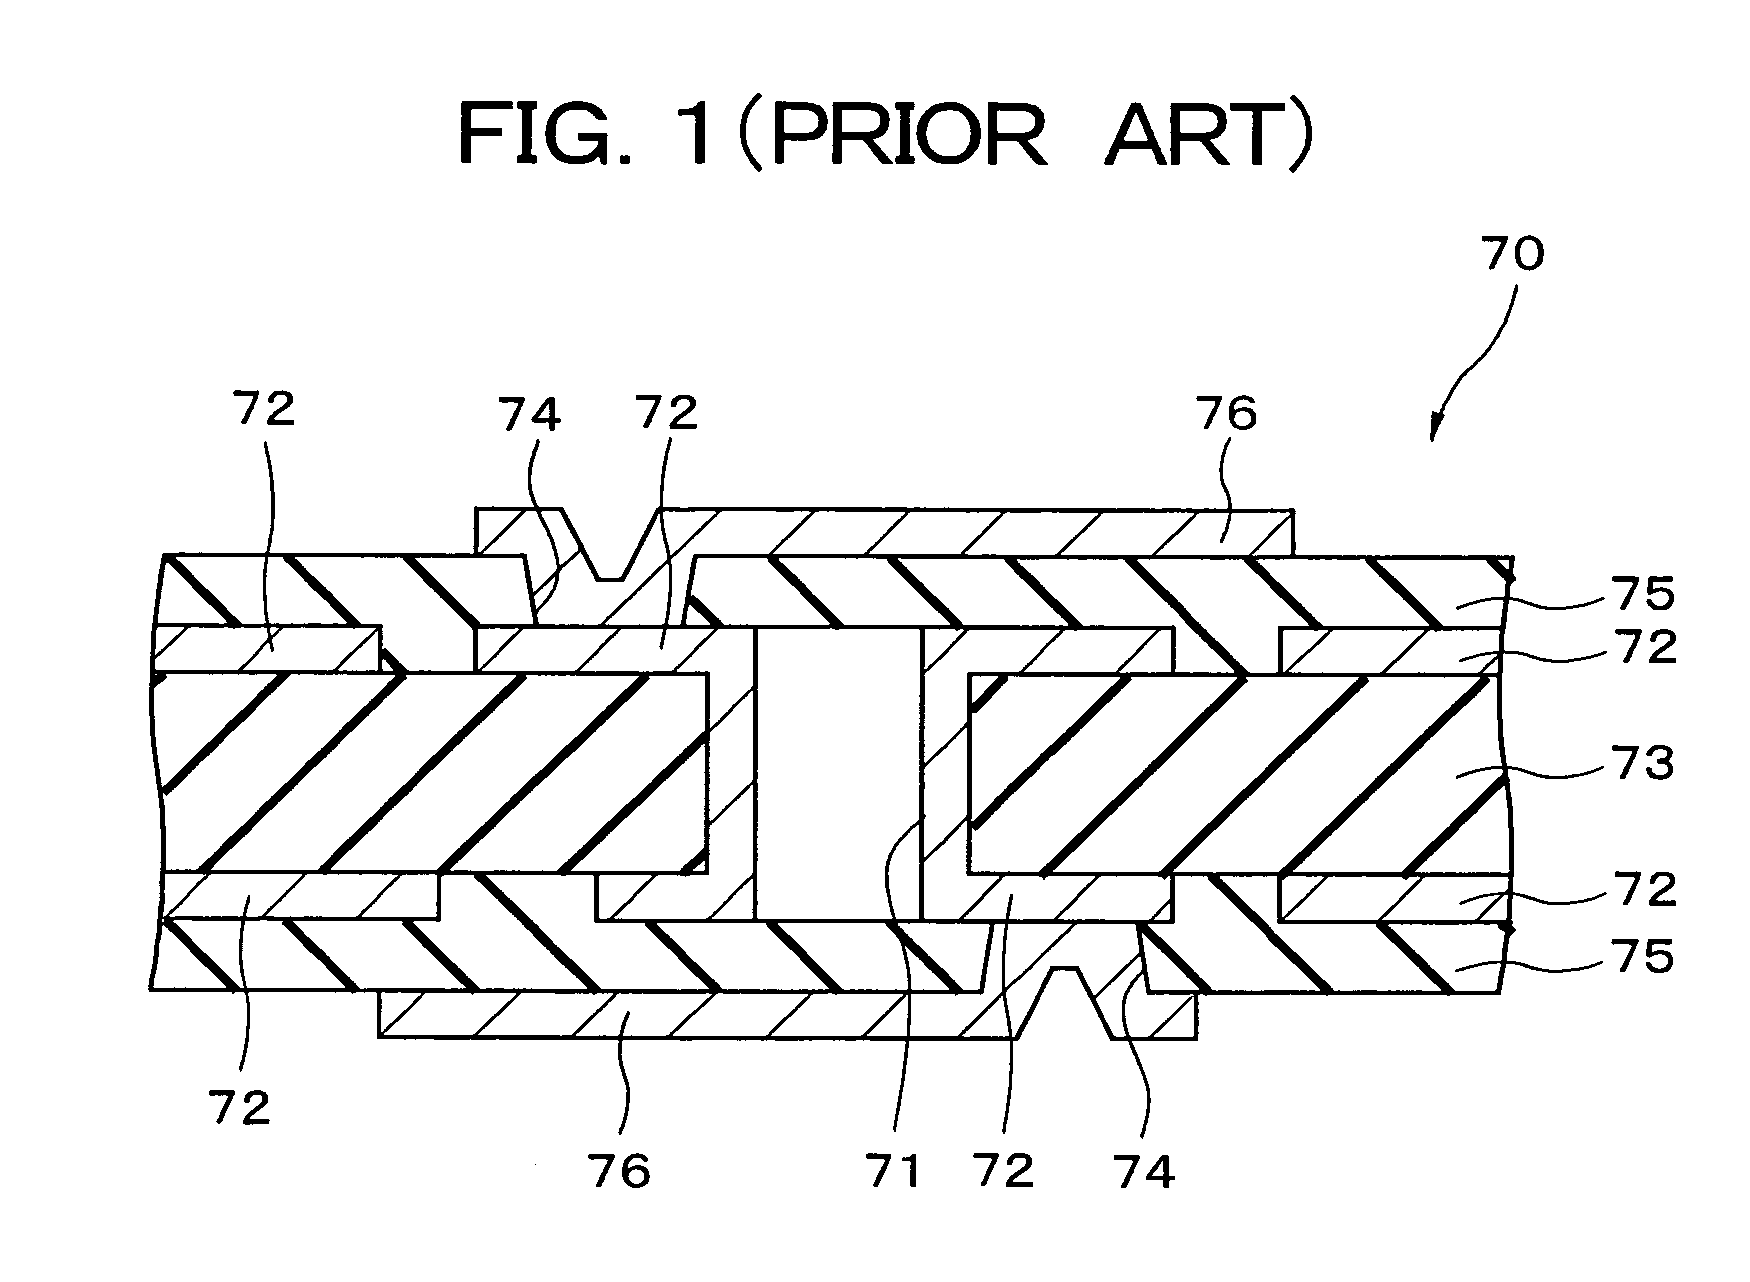 Wiring board, method for manufacturing same, and semiconductor package